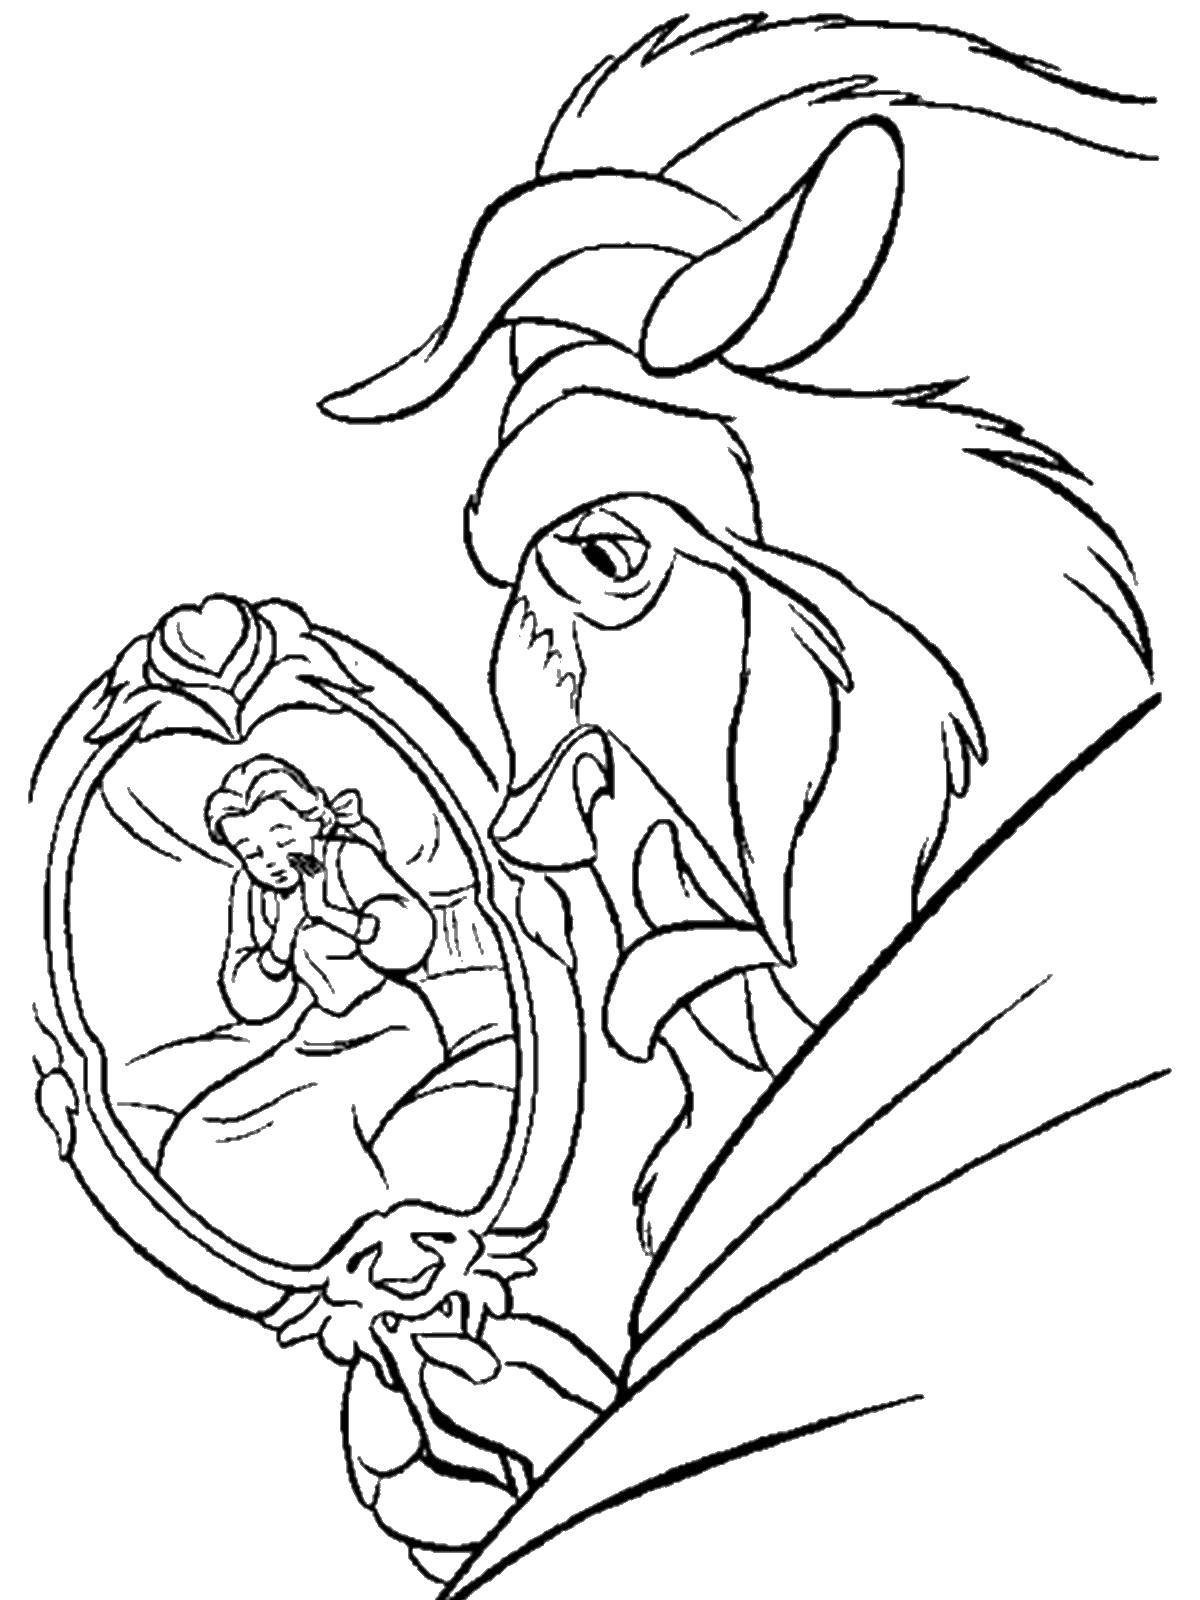 Coloring Beauty Belle and the beast. Category Disney cartoons. Tags:  beautiful , monster.